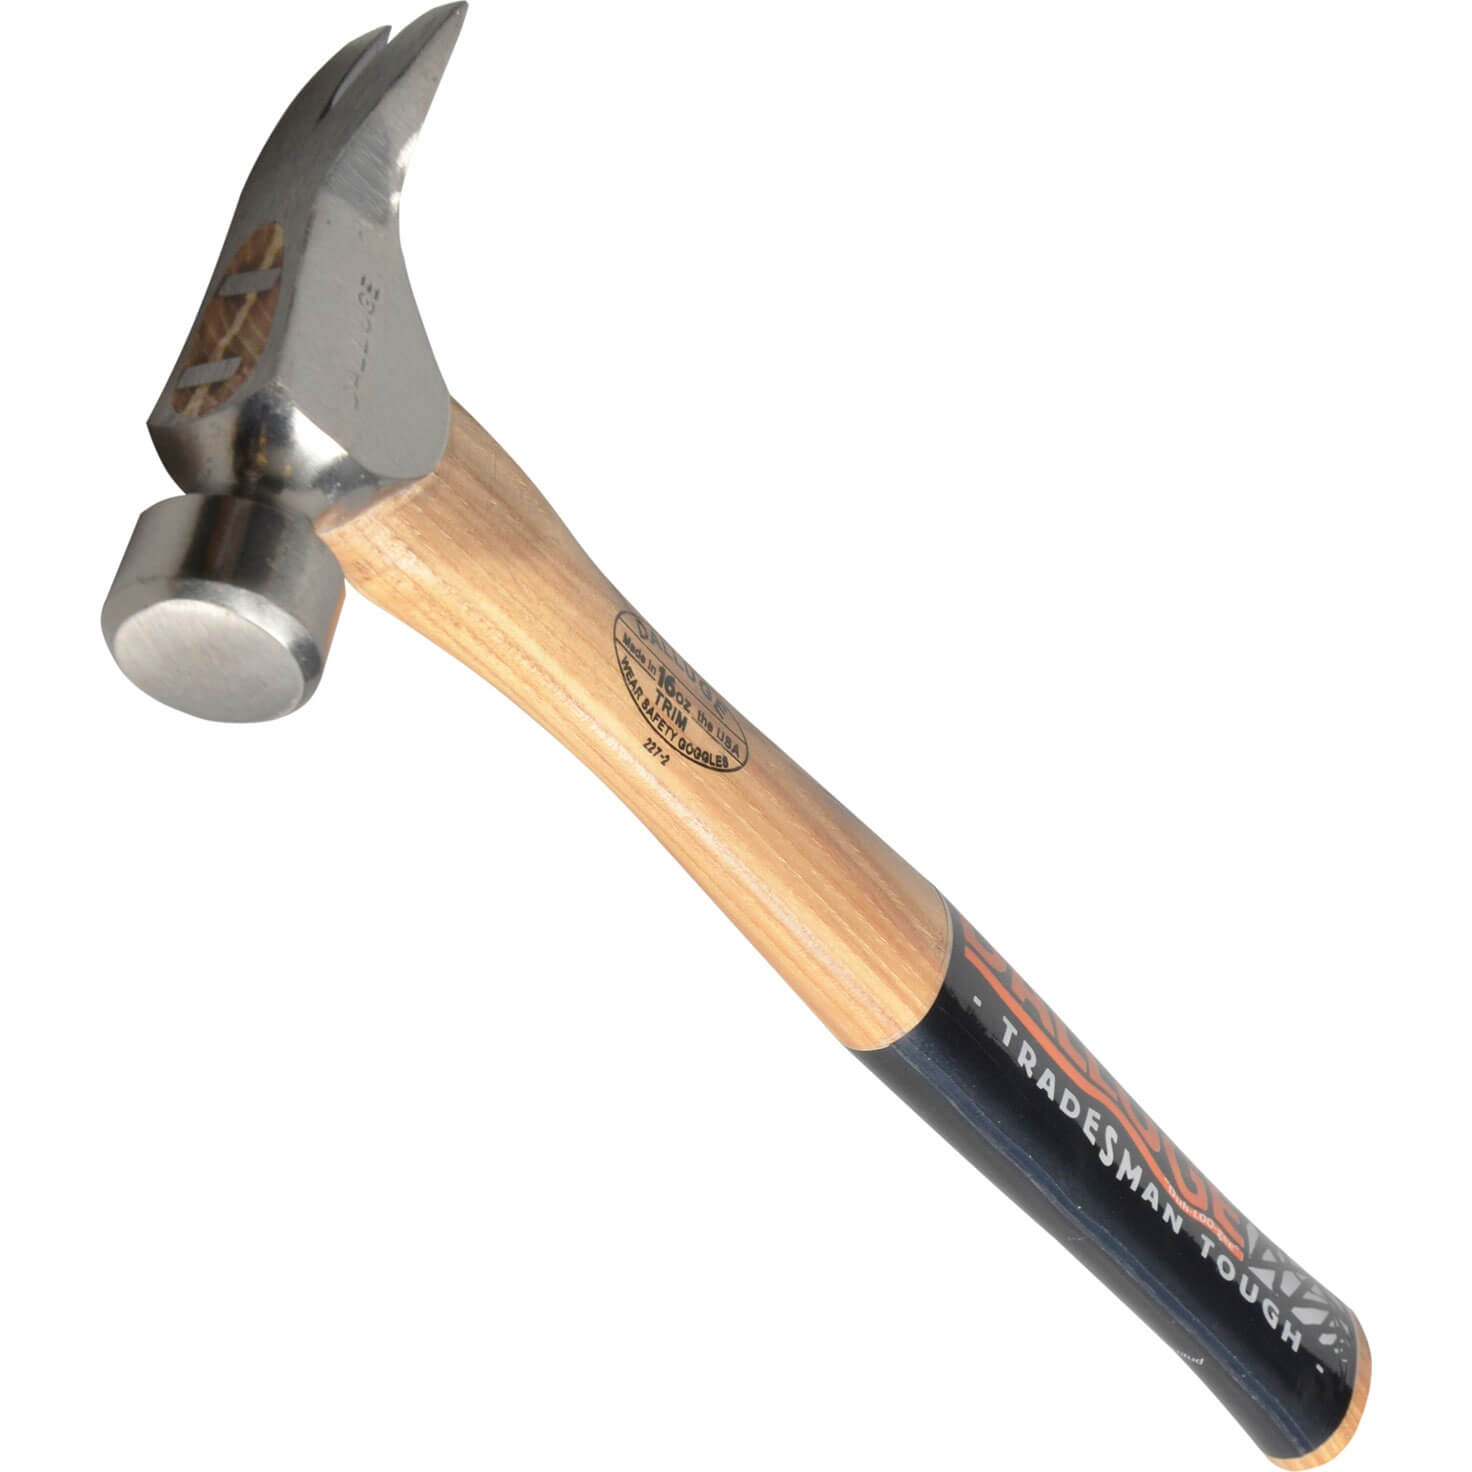 Image of Vaughan Trim Hammer with Plain Face and Straight Handle 450g